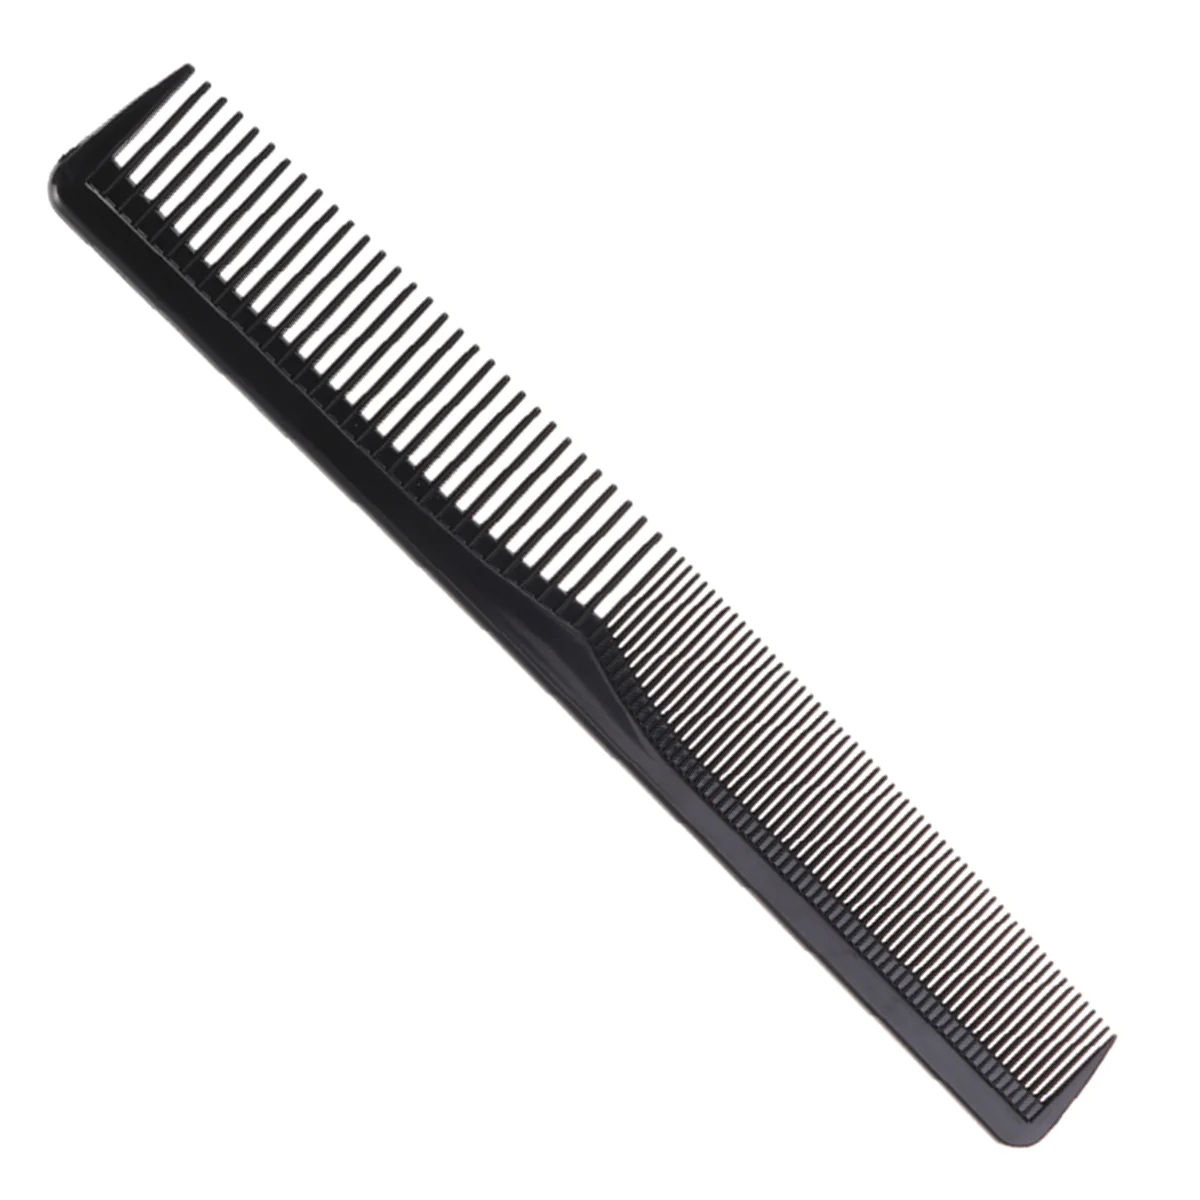 Practical Compact Plastic Anti-Static Tooth Design Hairdressing Double Side Pettine Hair Combs Hair Brushes For Salon Home Hotel laboao laboratory orbital shaker compact design for centrifuge tubes